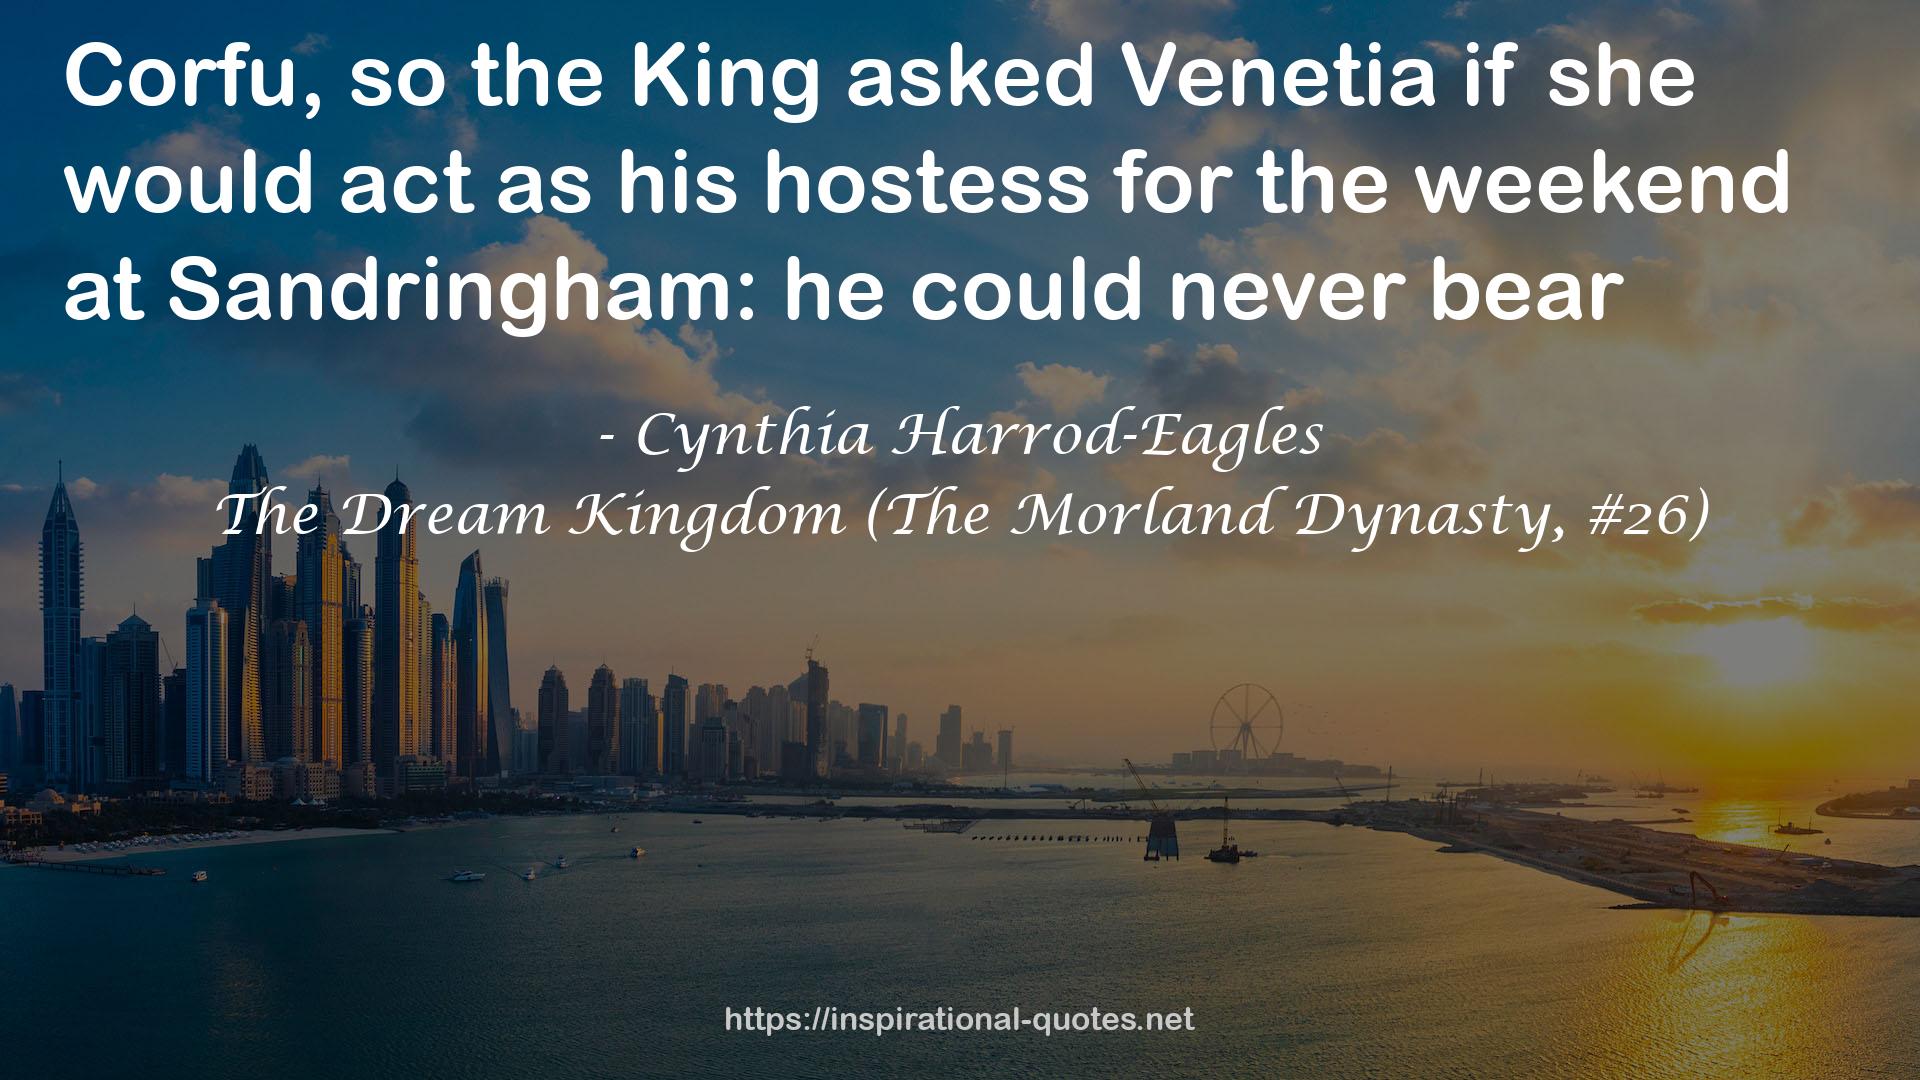 The Dream Kingdom (The Morland Dynasty, #26) QUOTES